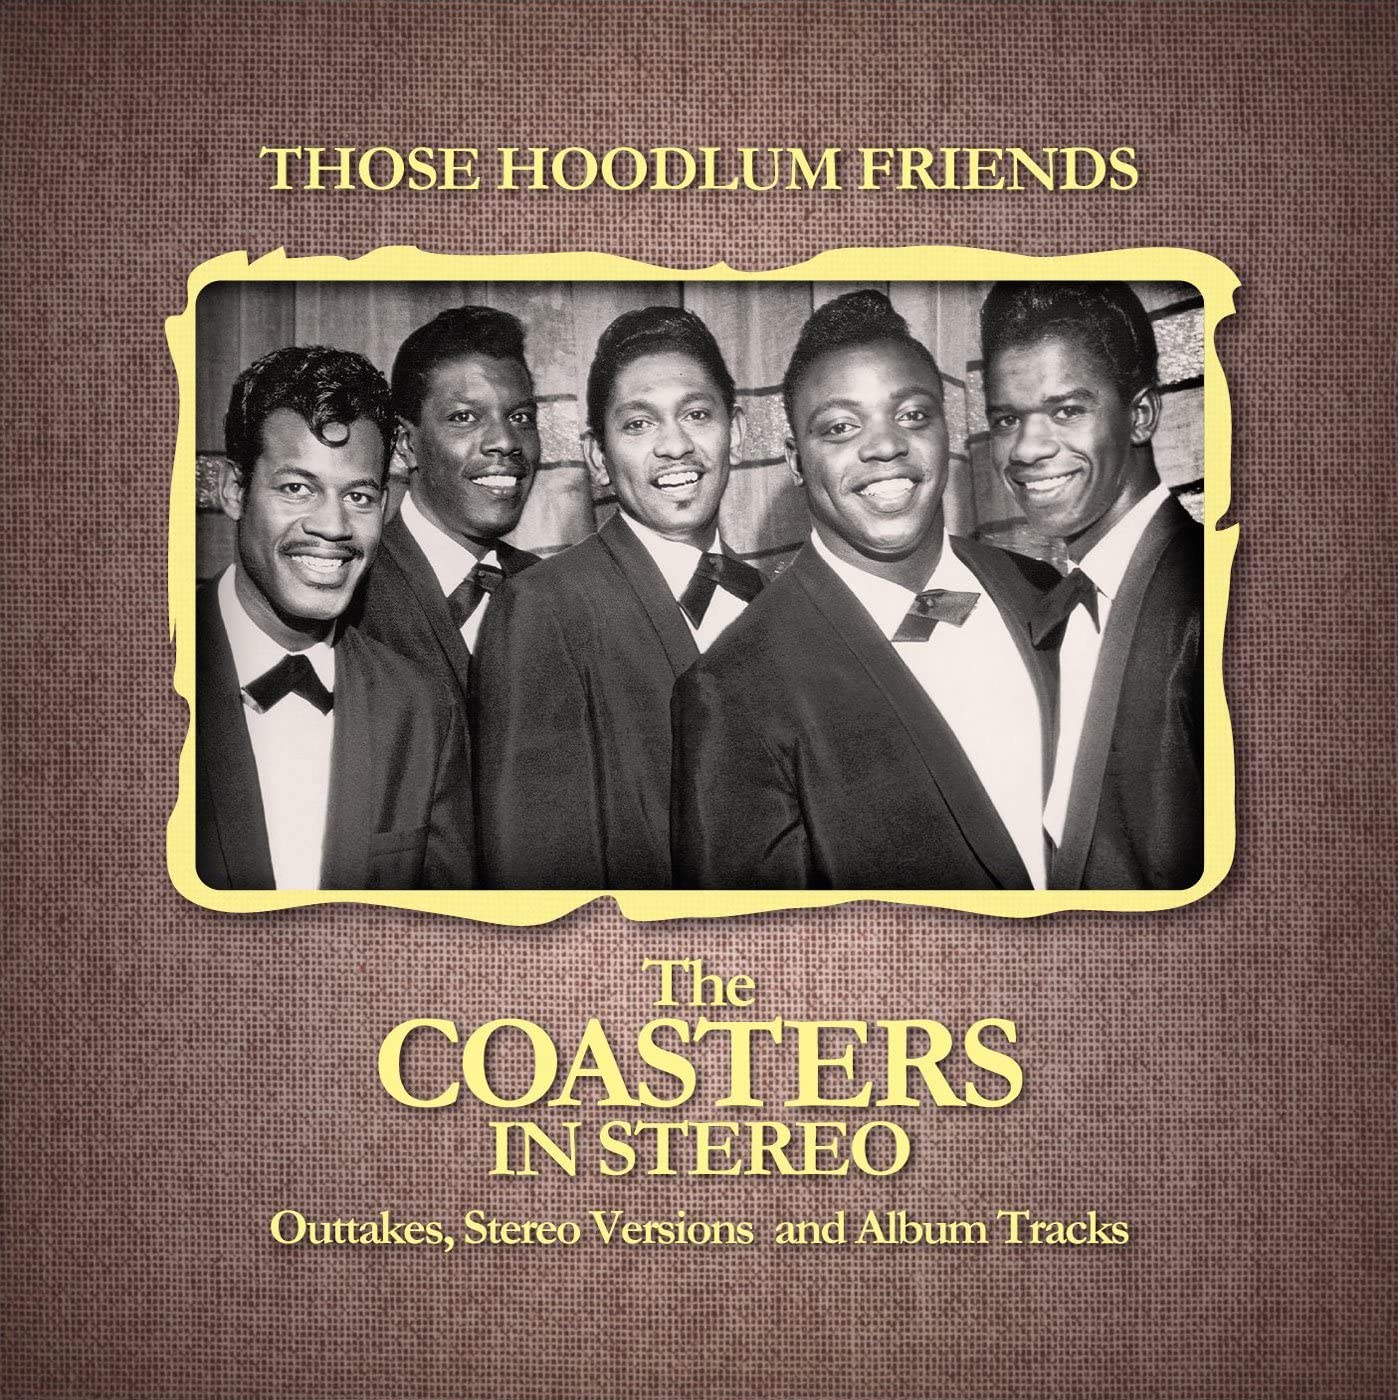 The Coasters - Those Hoodlum Friends In Stereo - 2CD